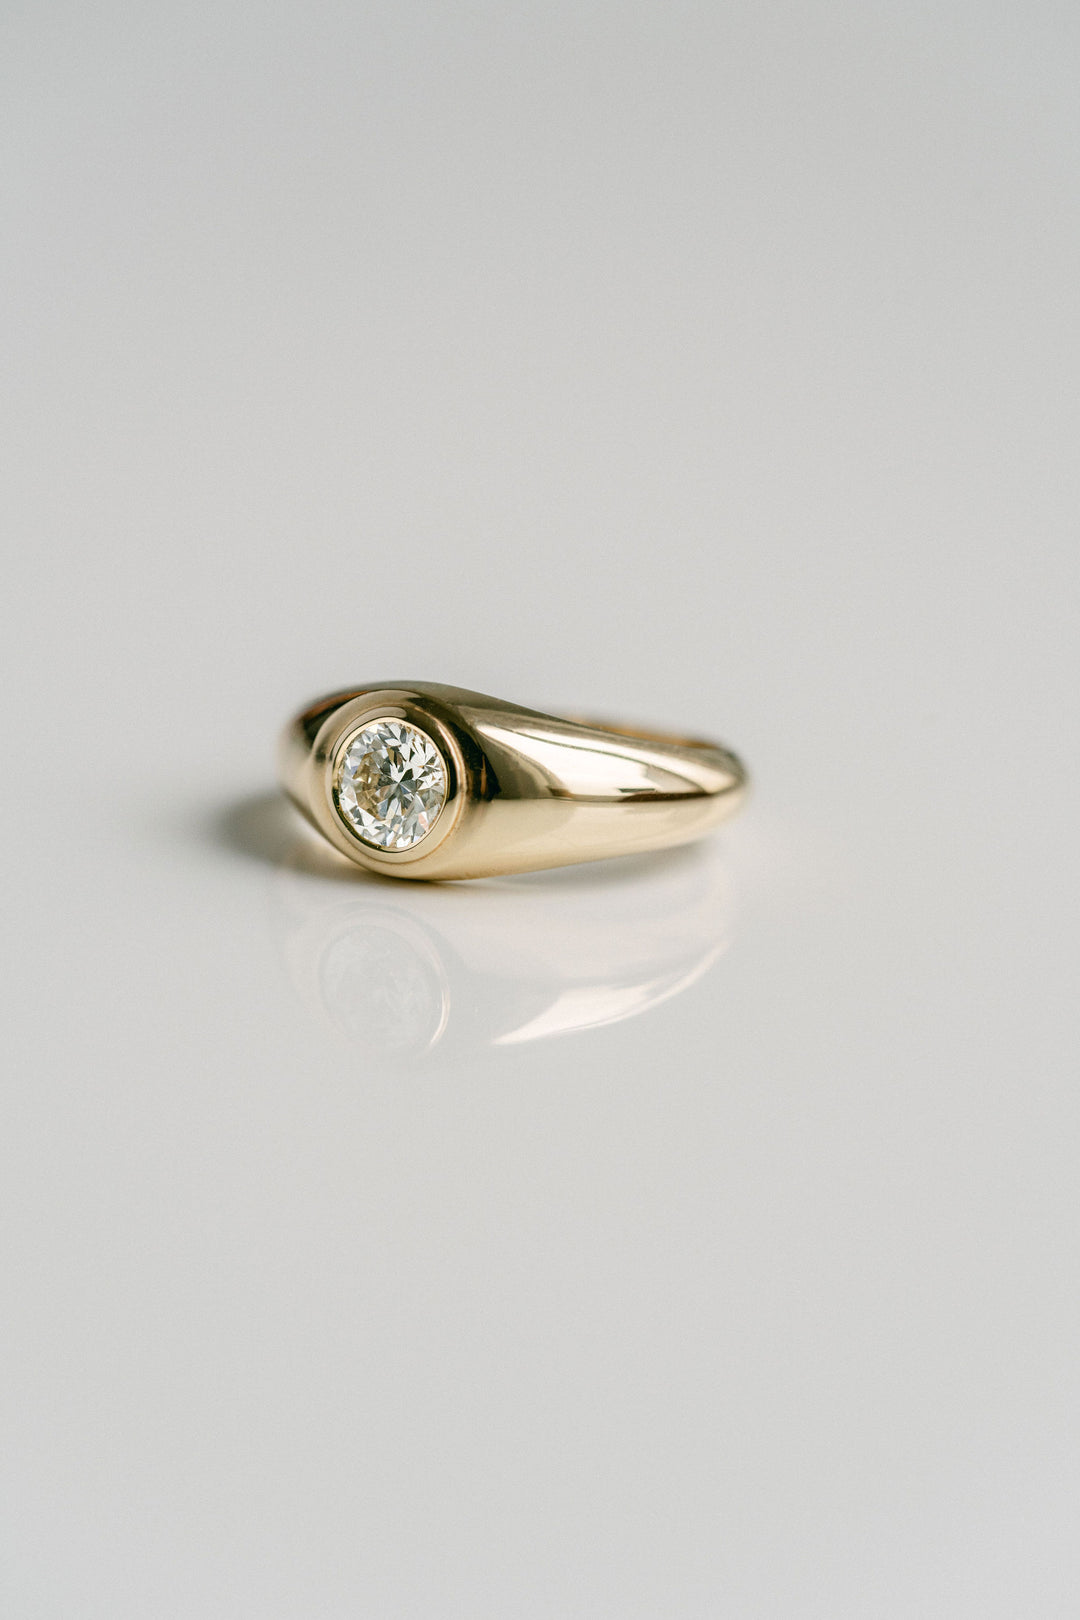 Polished Mens Signet Ring With Round Diamond, 14k Yellow Gold